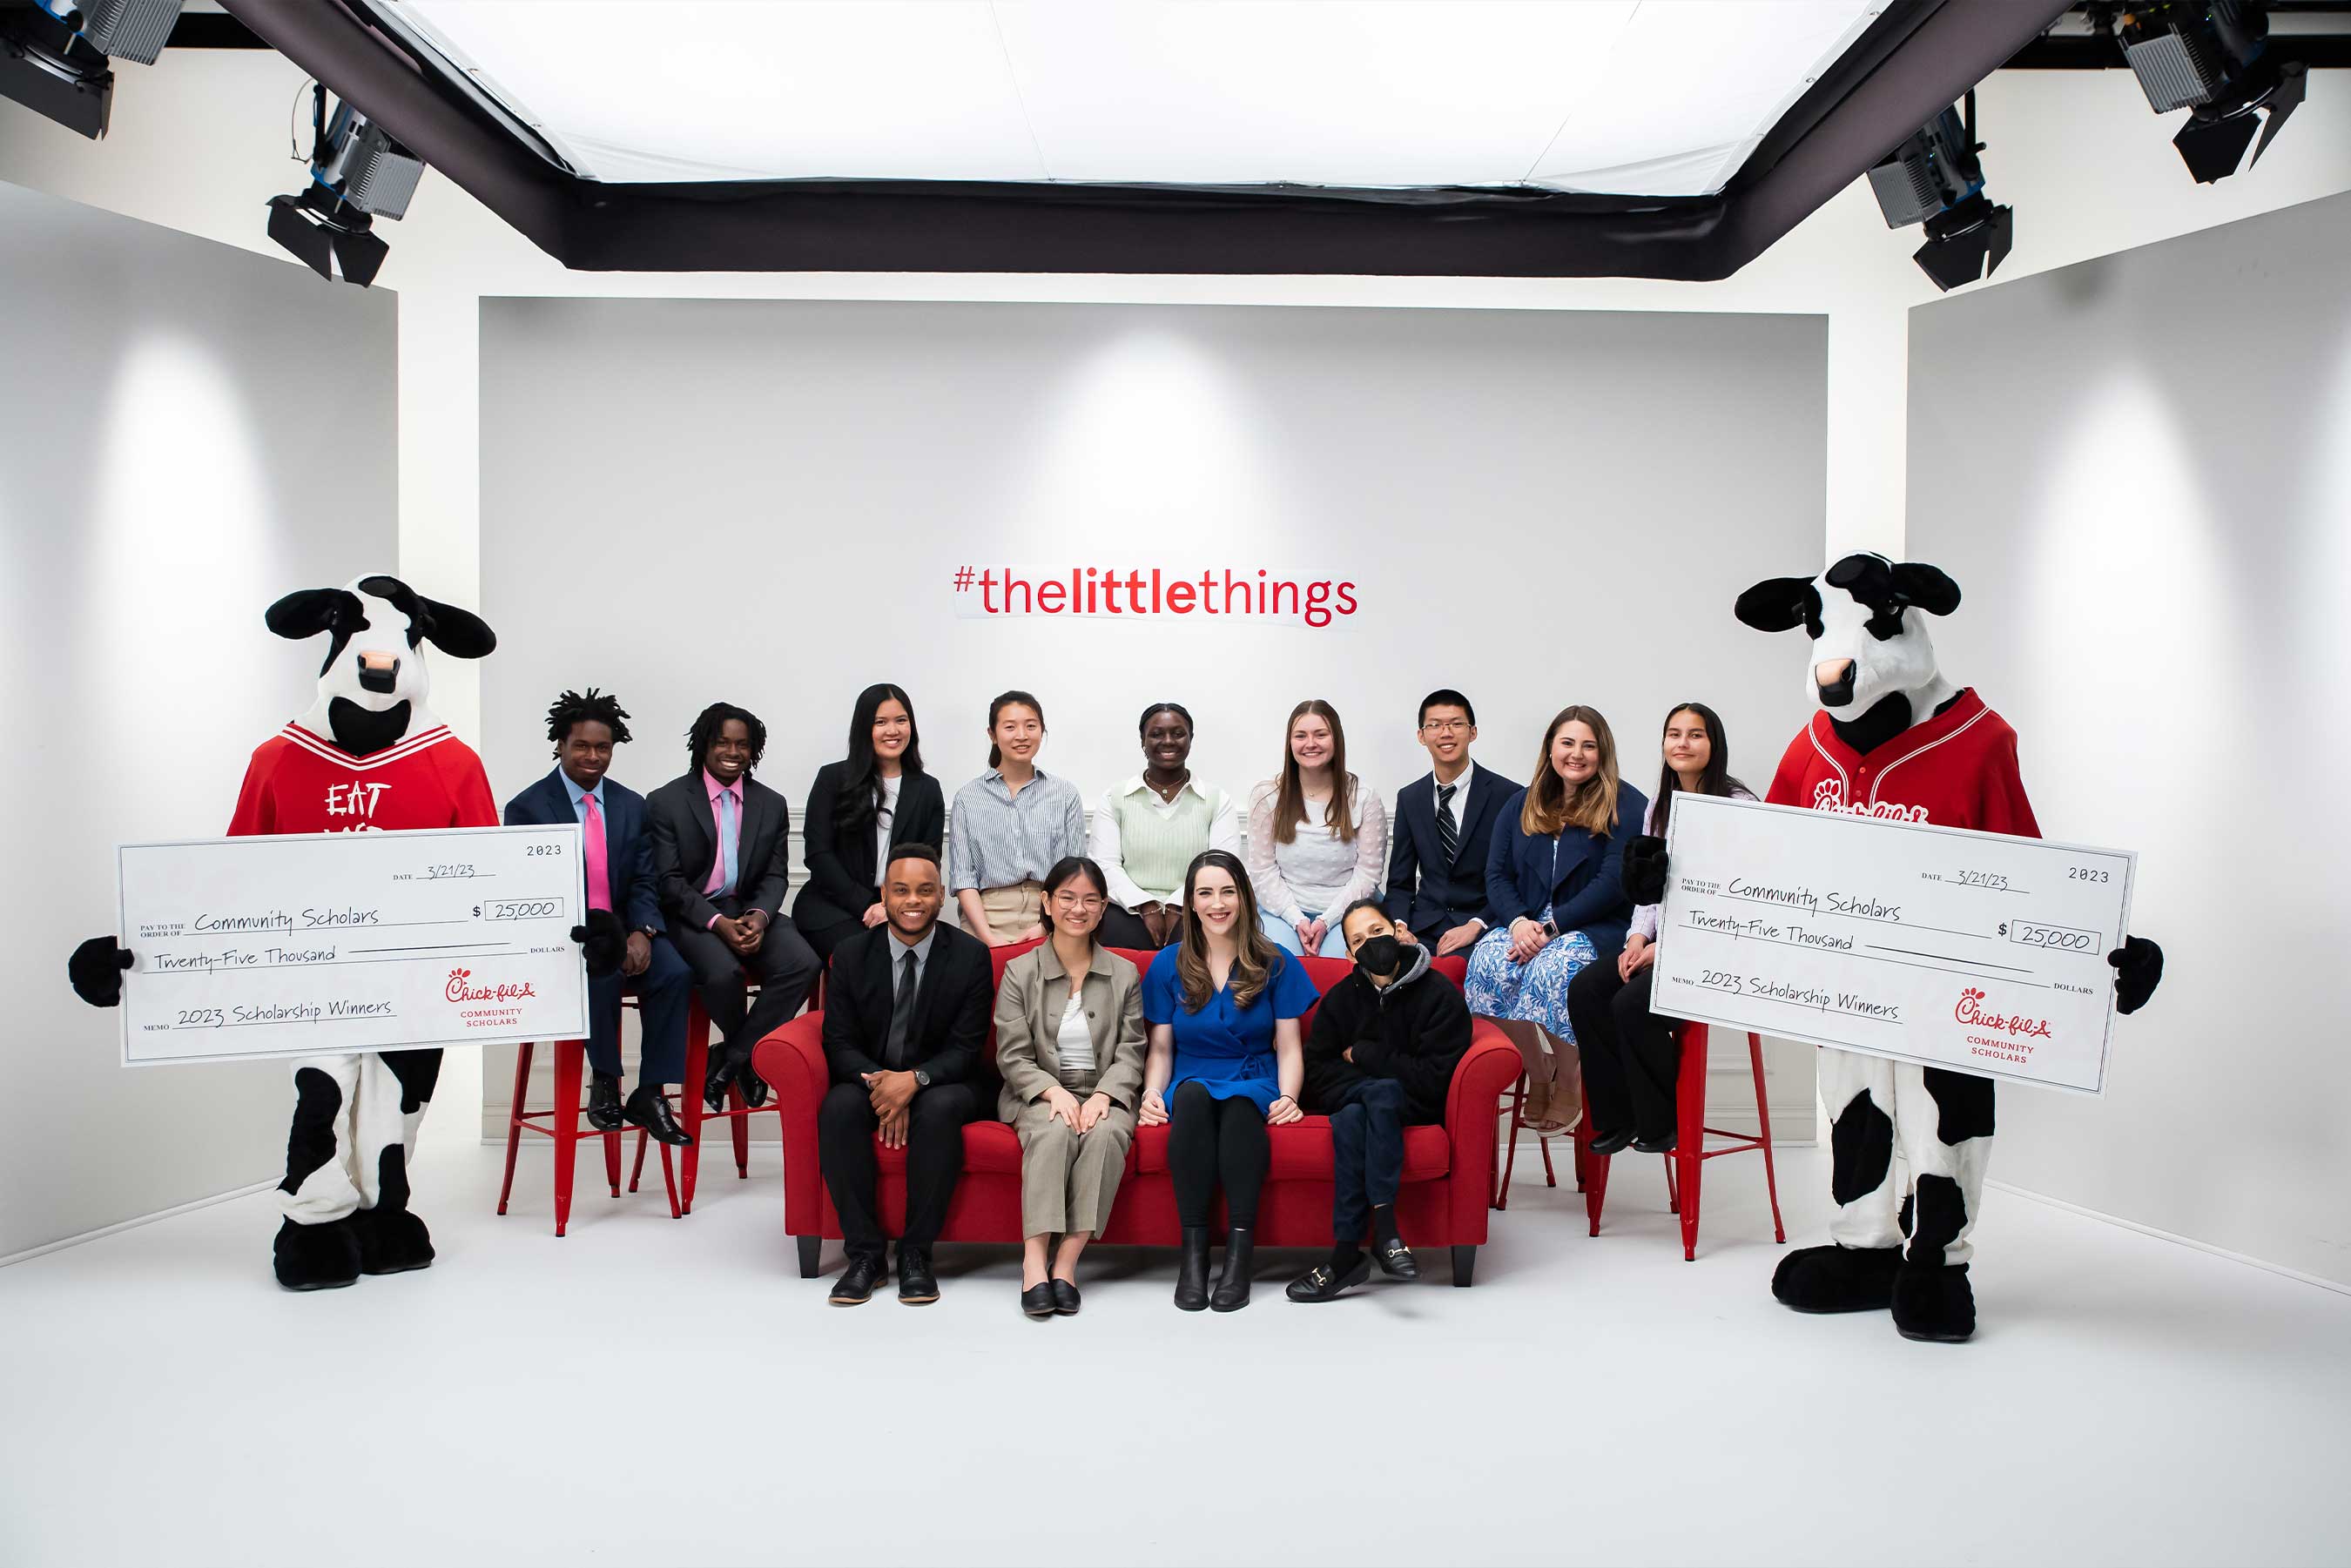 Chick-fil-A, Inc. surprised the inaugural class of the Chick-fil-A Community Scholars program with a $25,000 scholarship for each recipient at the Chick-fil-A Support Center in Atlanta.